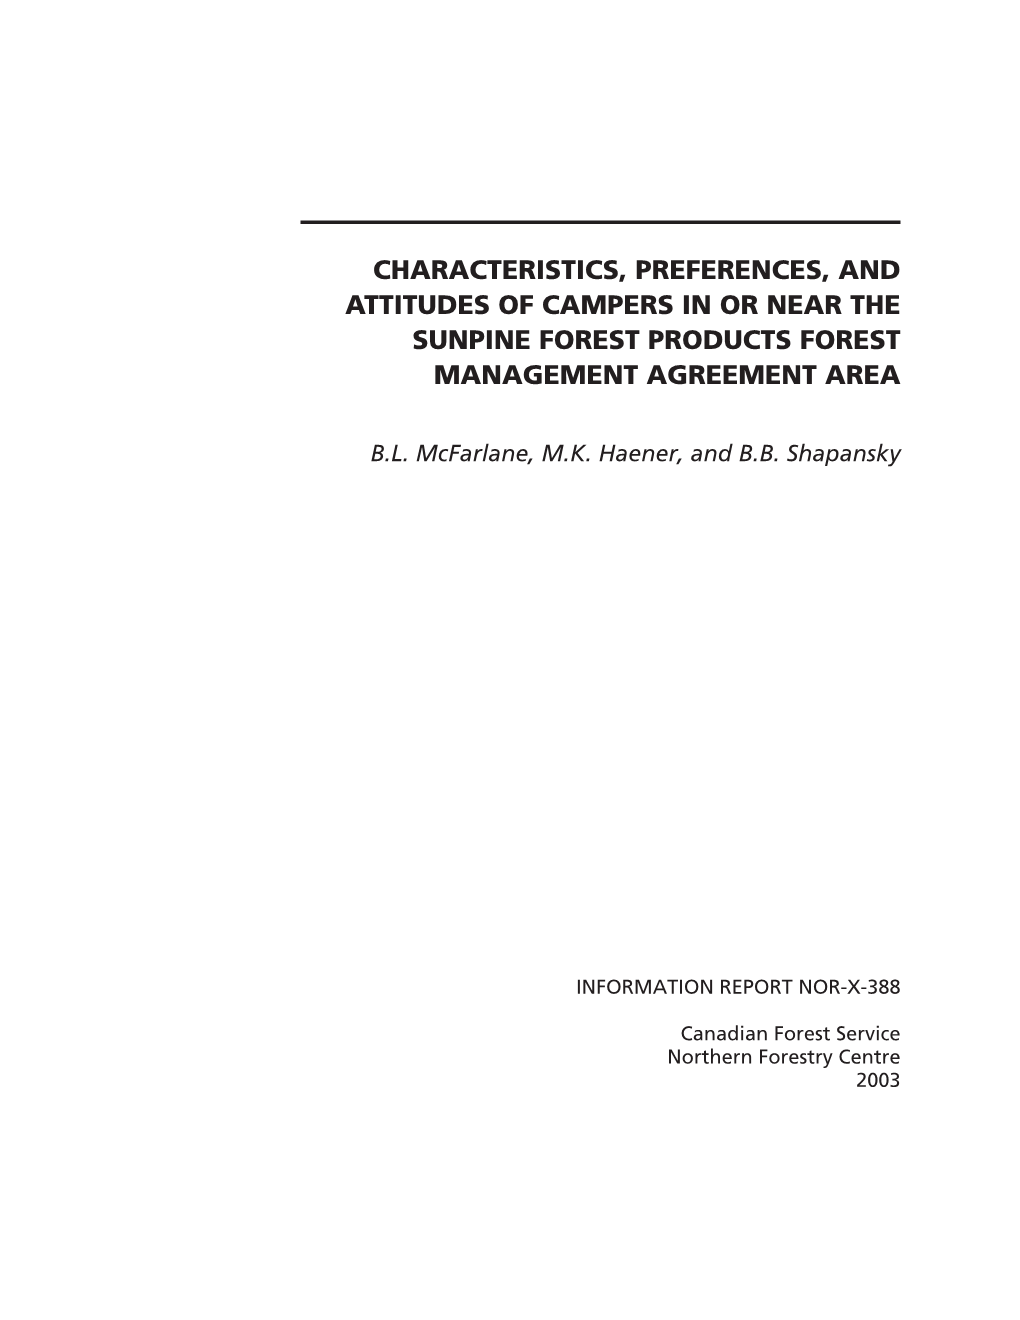 Characteristics, Preferences, and Attitudes of Campers in Or Near the Sunpine Forest Products Forest Management Agreement Area